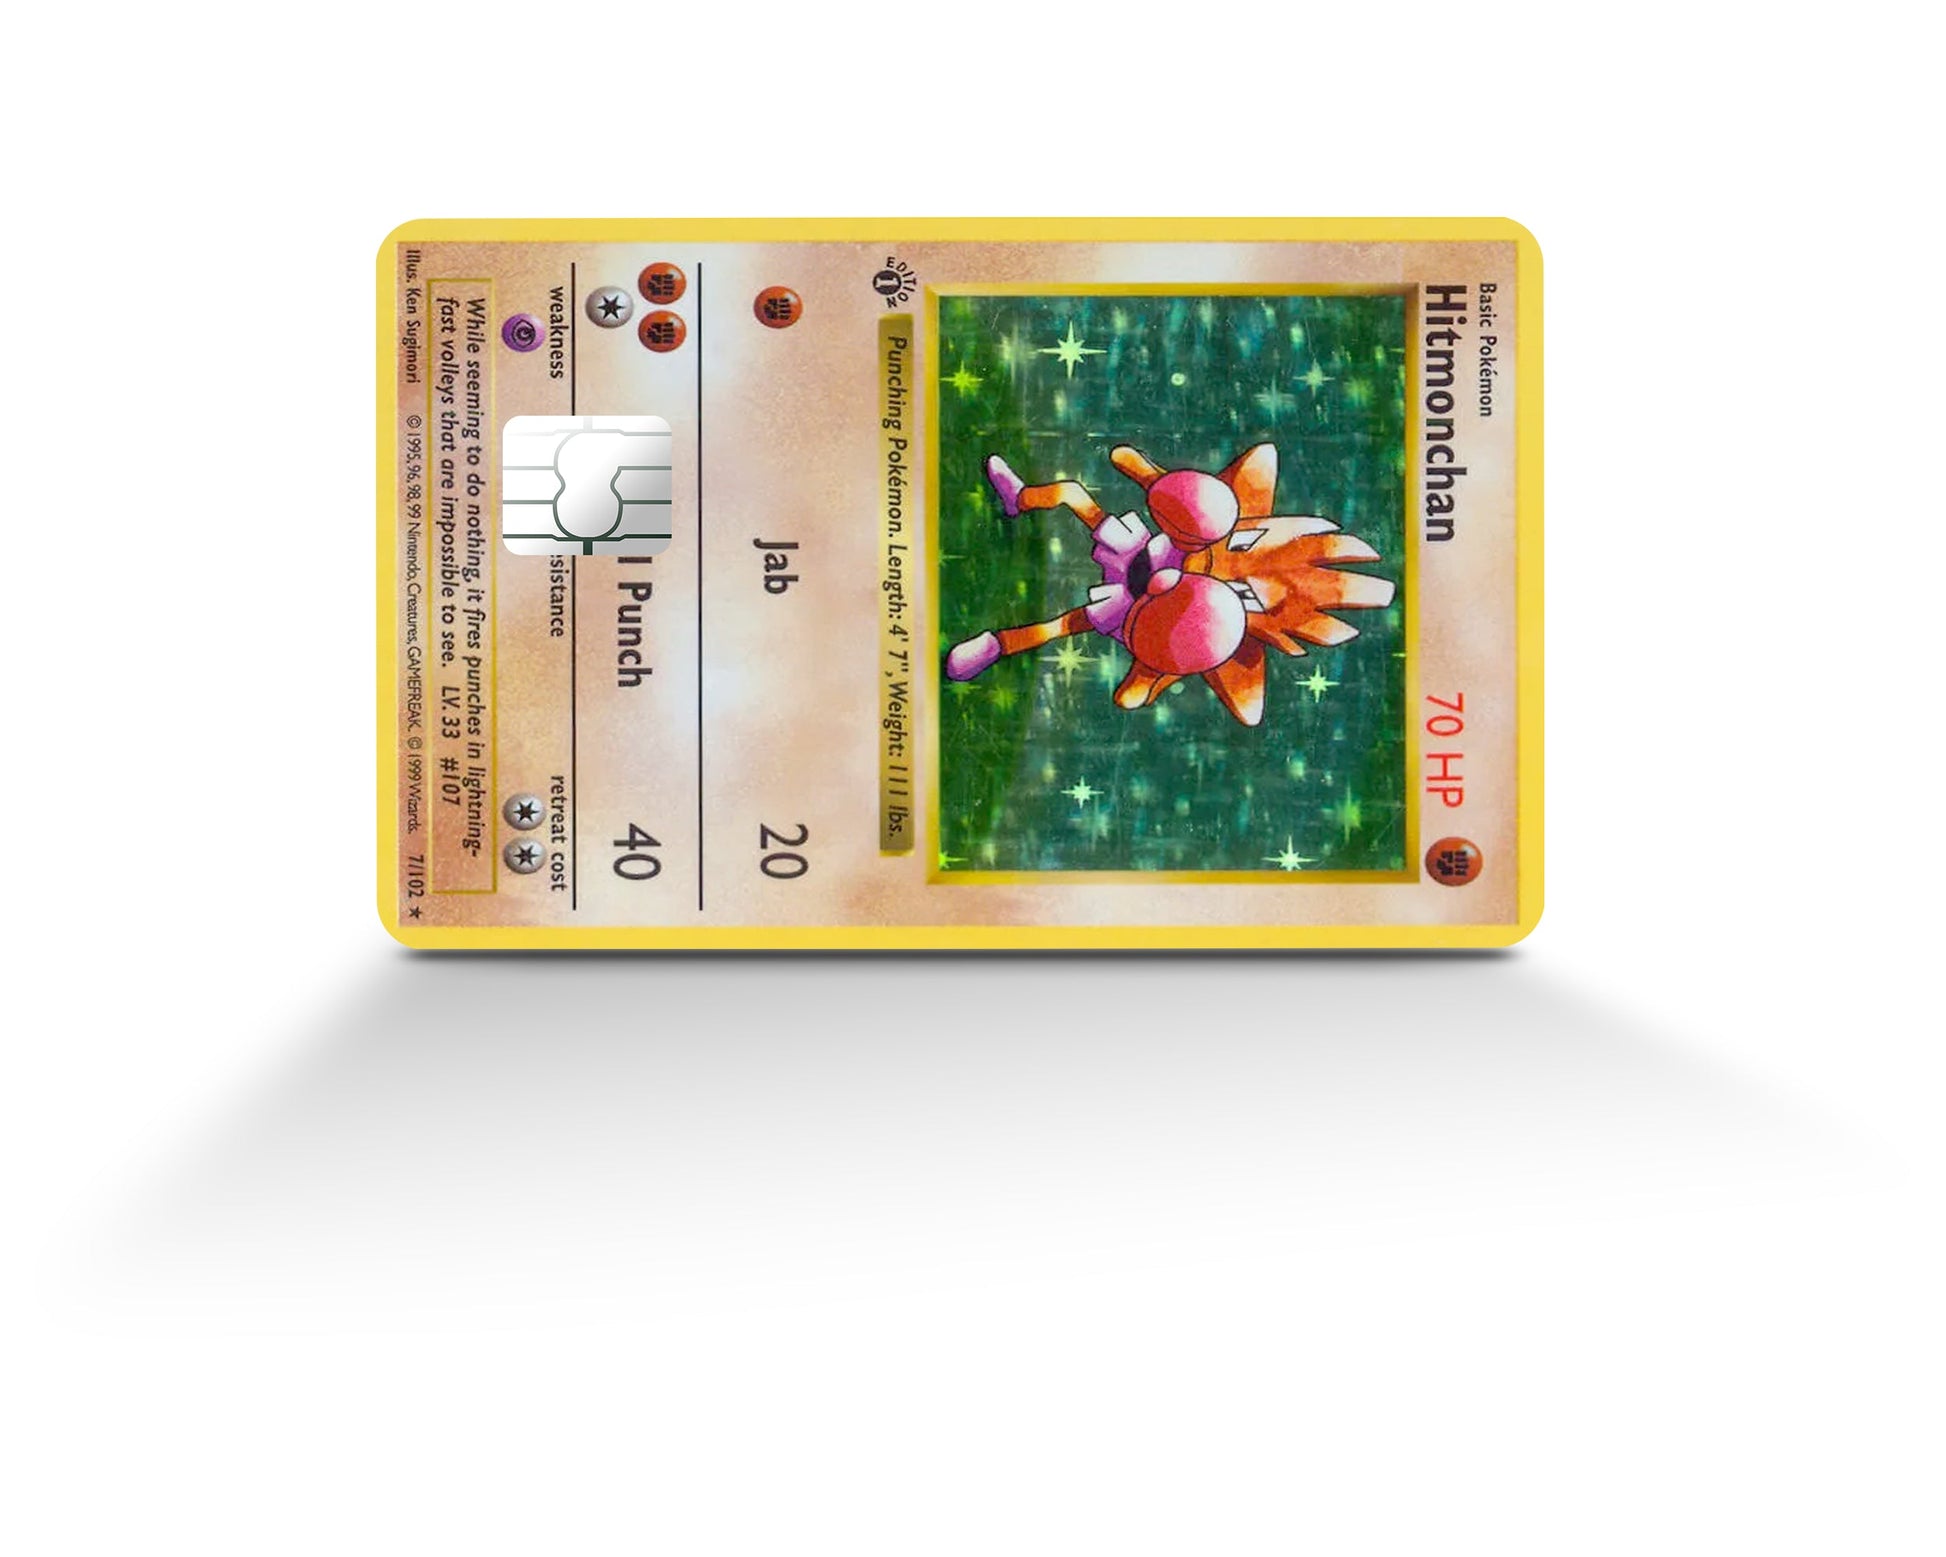 Articuno Pokemon Card Credit Card Skin – Anime Town Creations